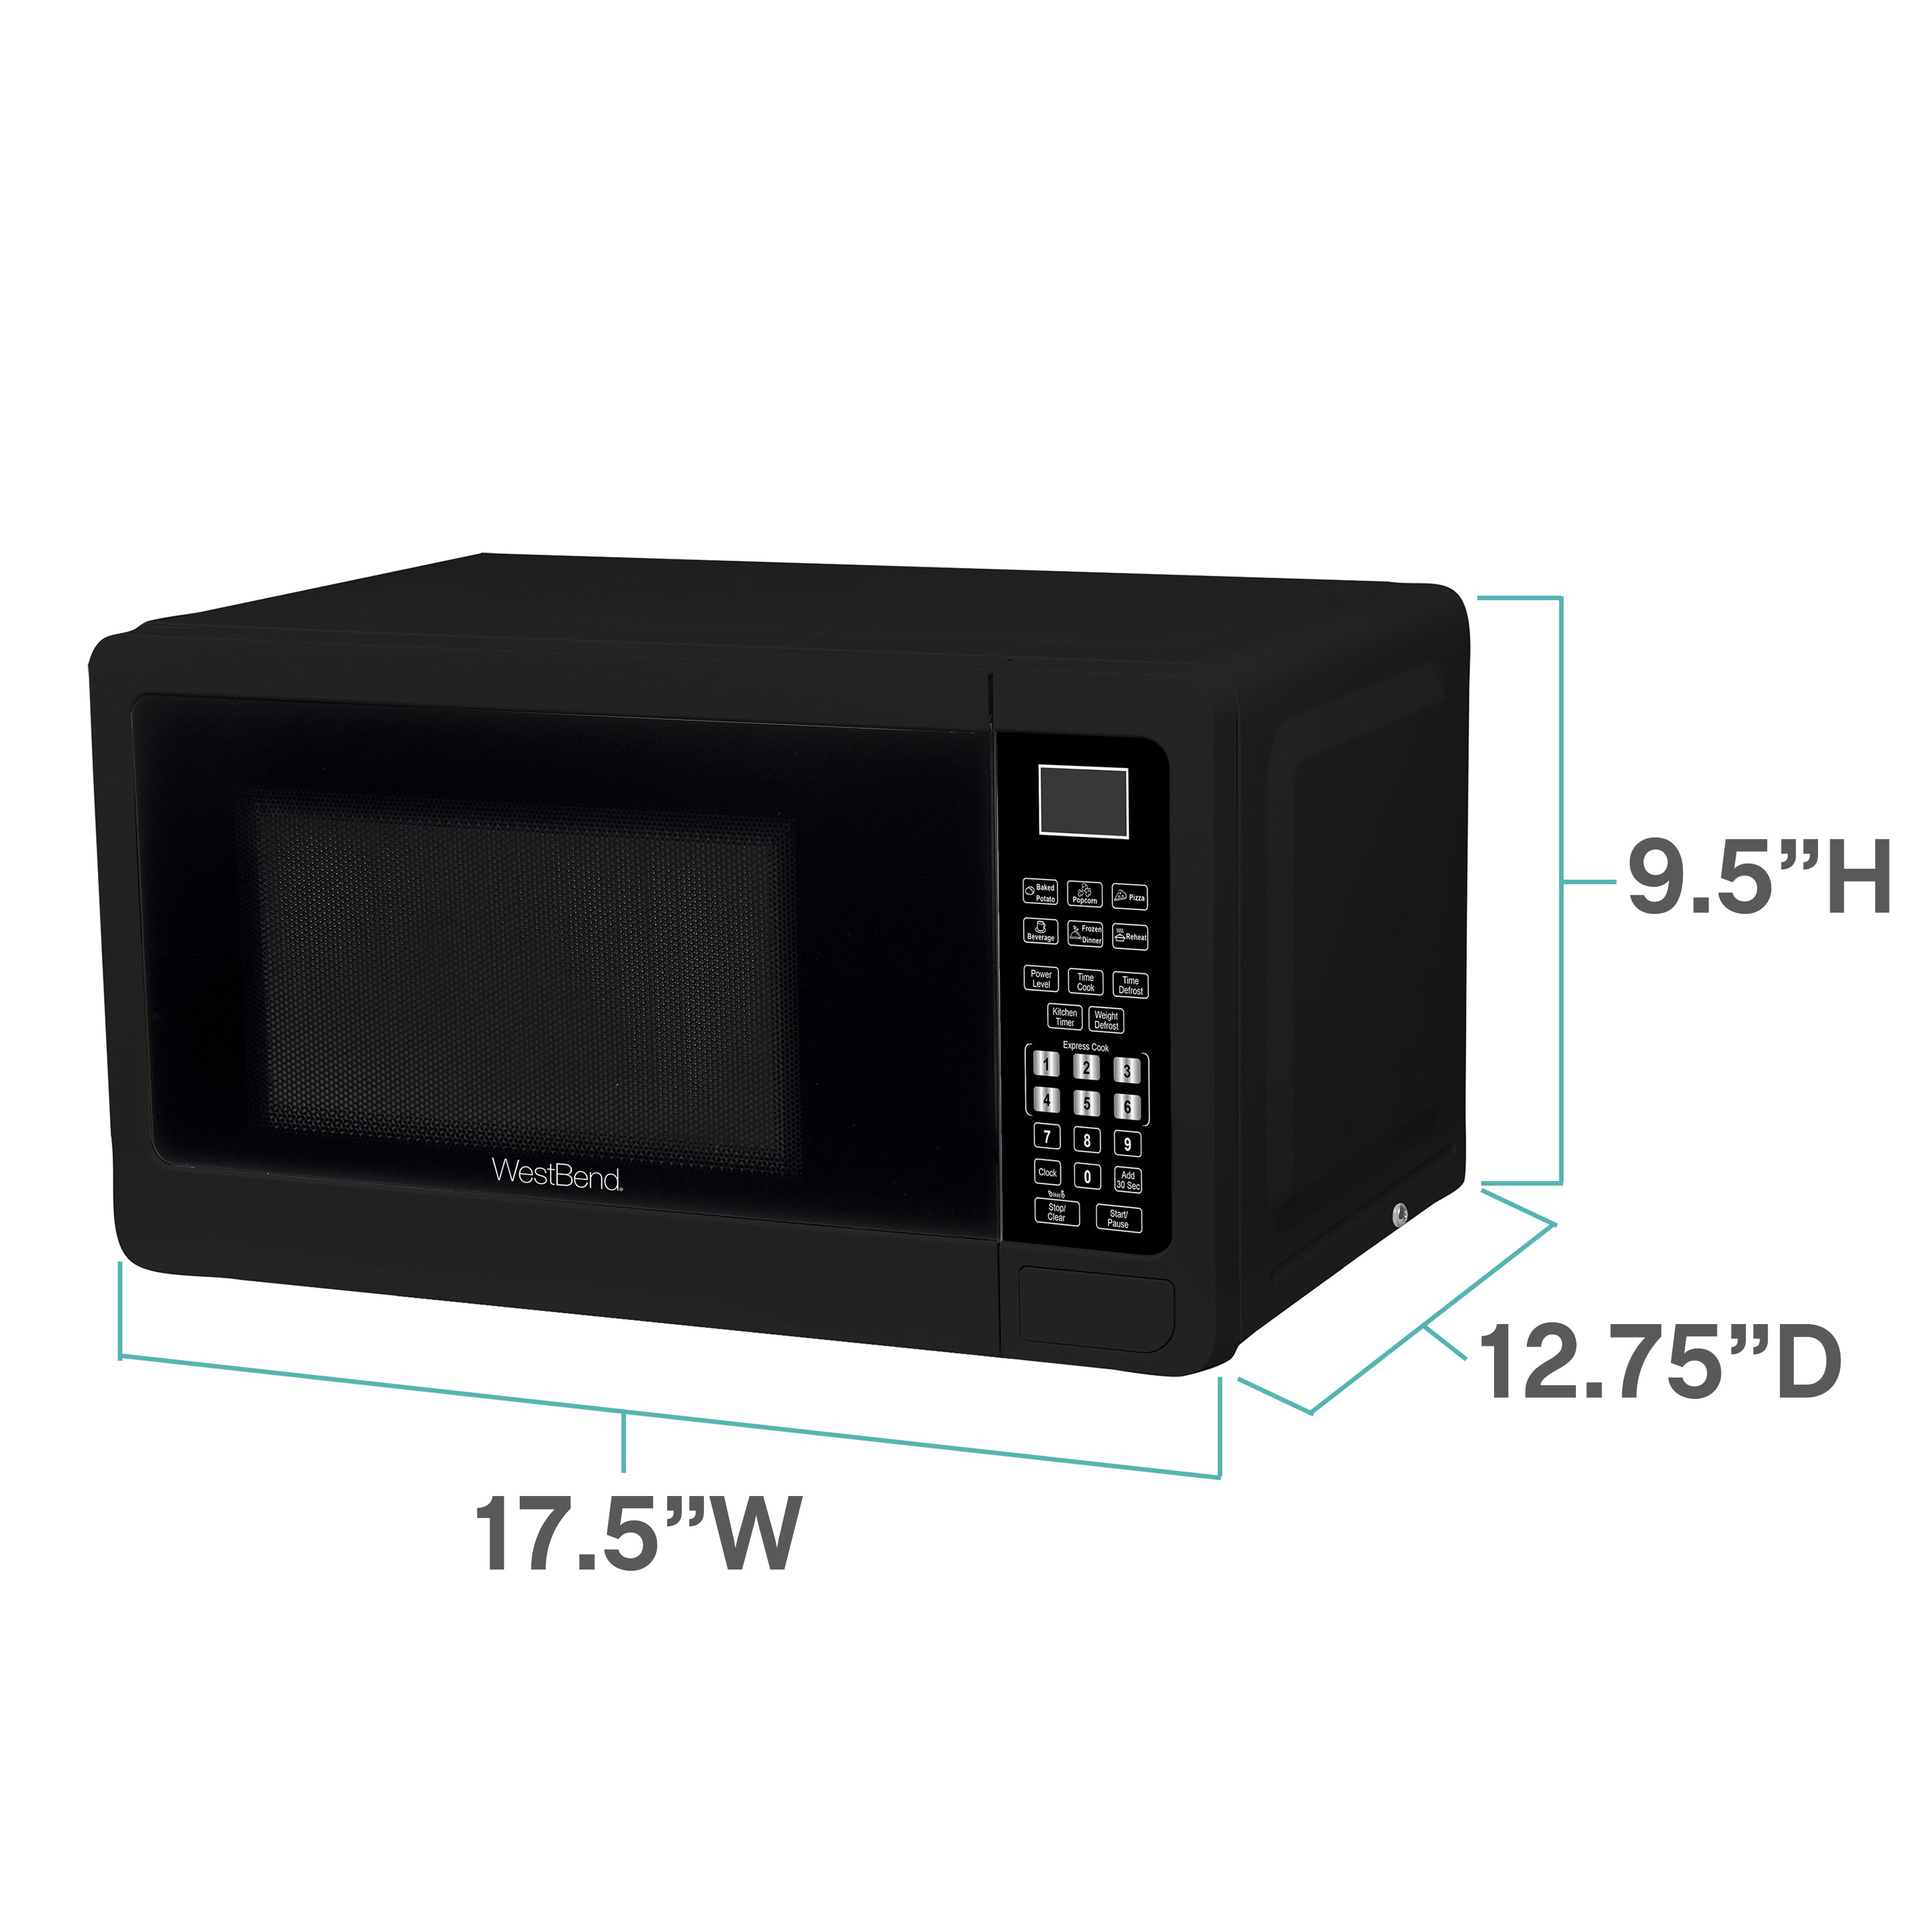 0.7 Cu ft Compact Countertop Microwave Oven, White